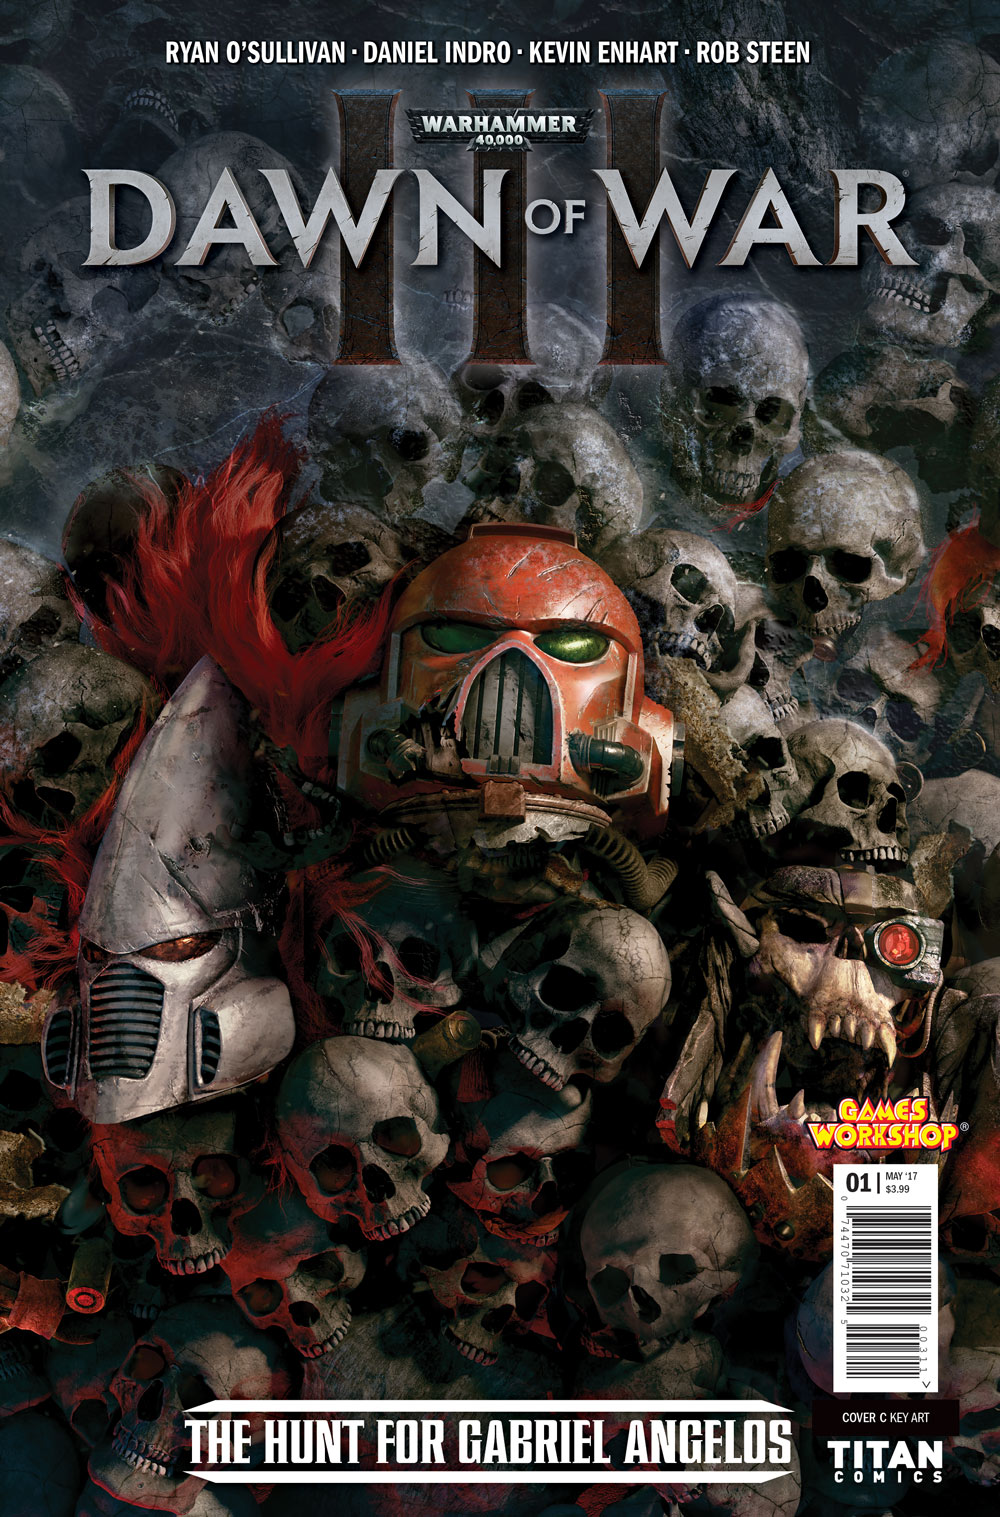 Warhammer_DOW3_#1_Cover C VIDEOGAME VARIANT